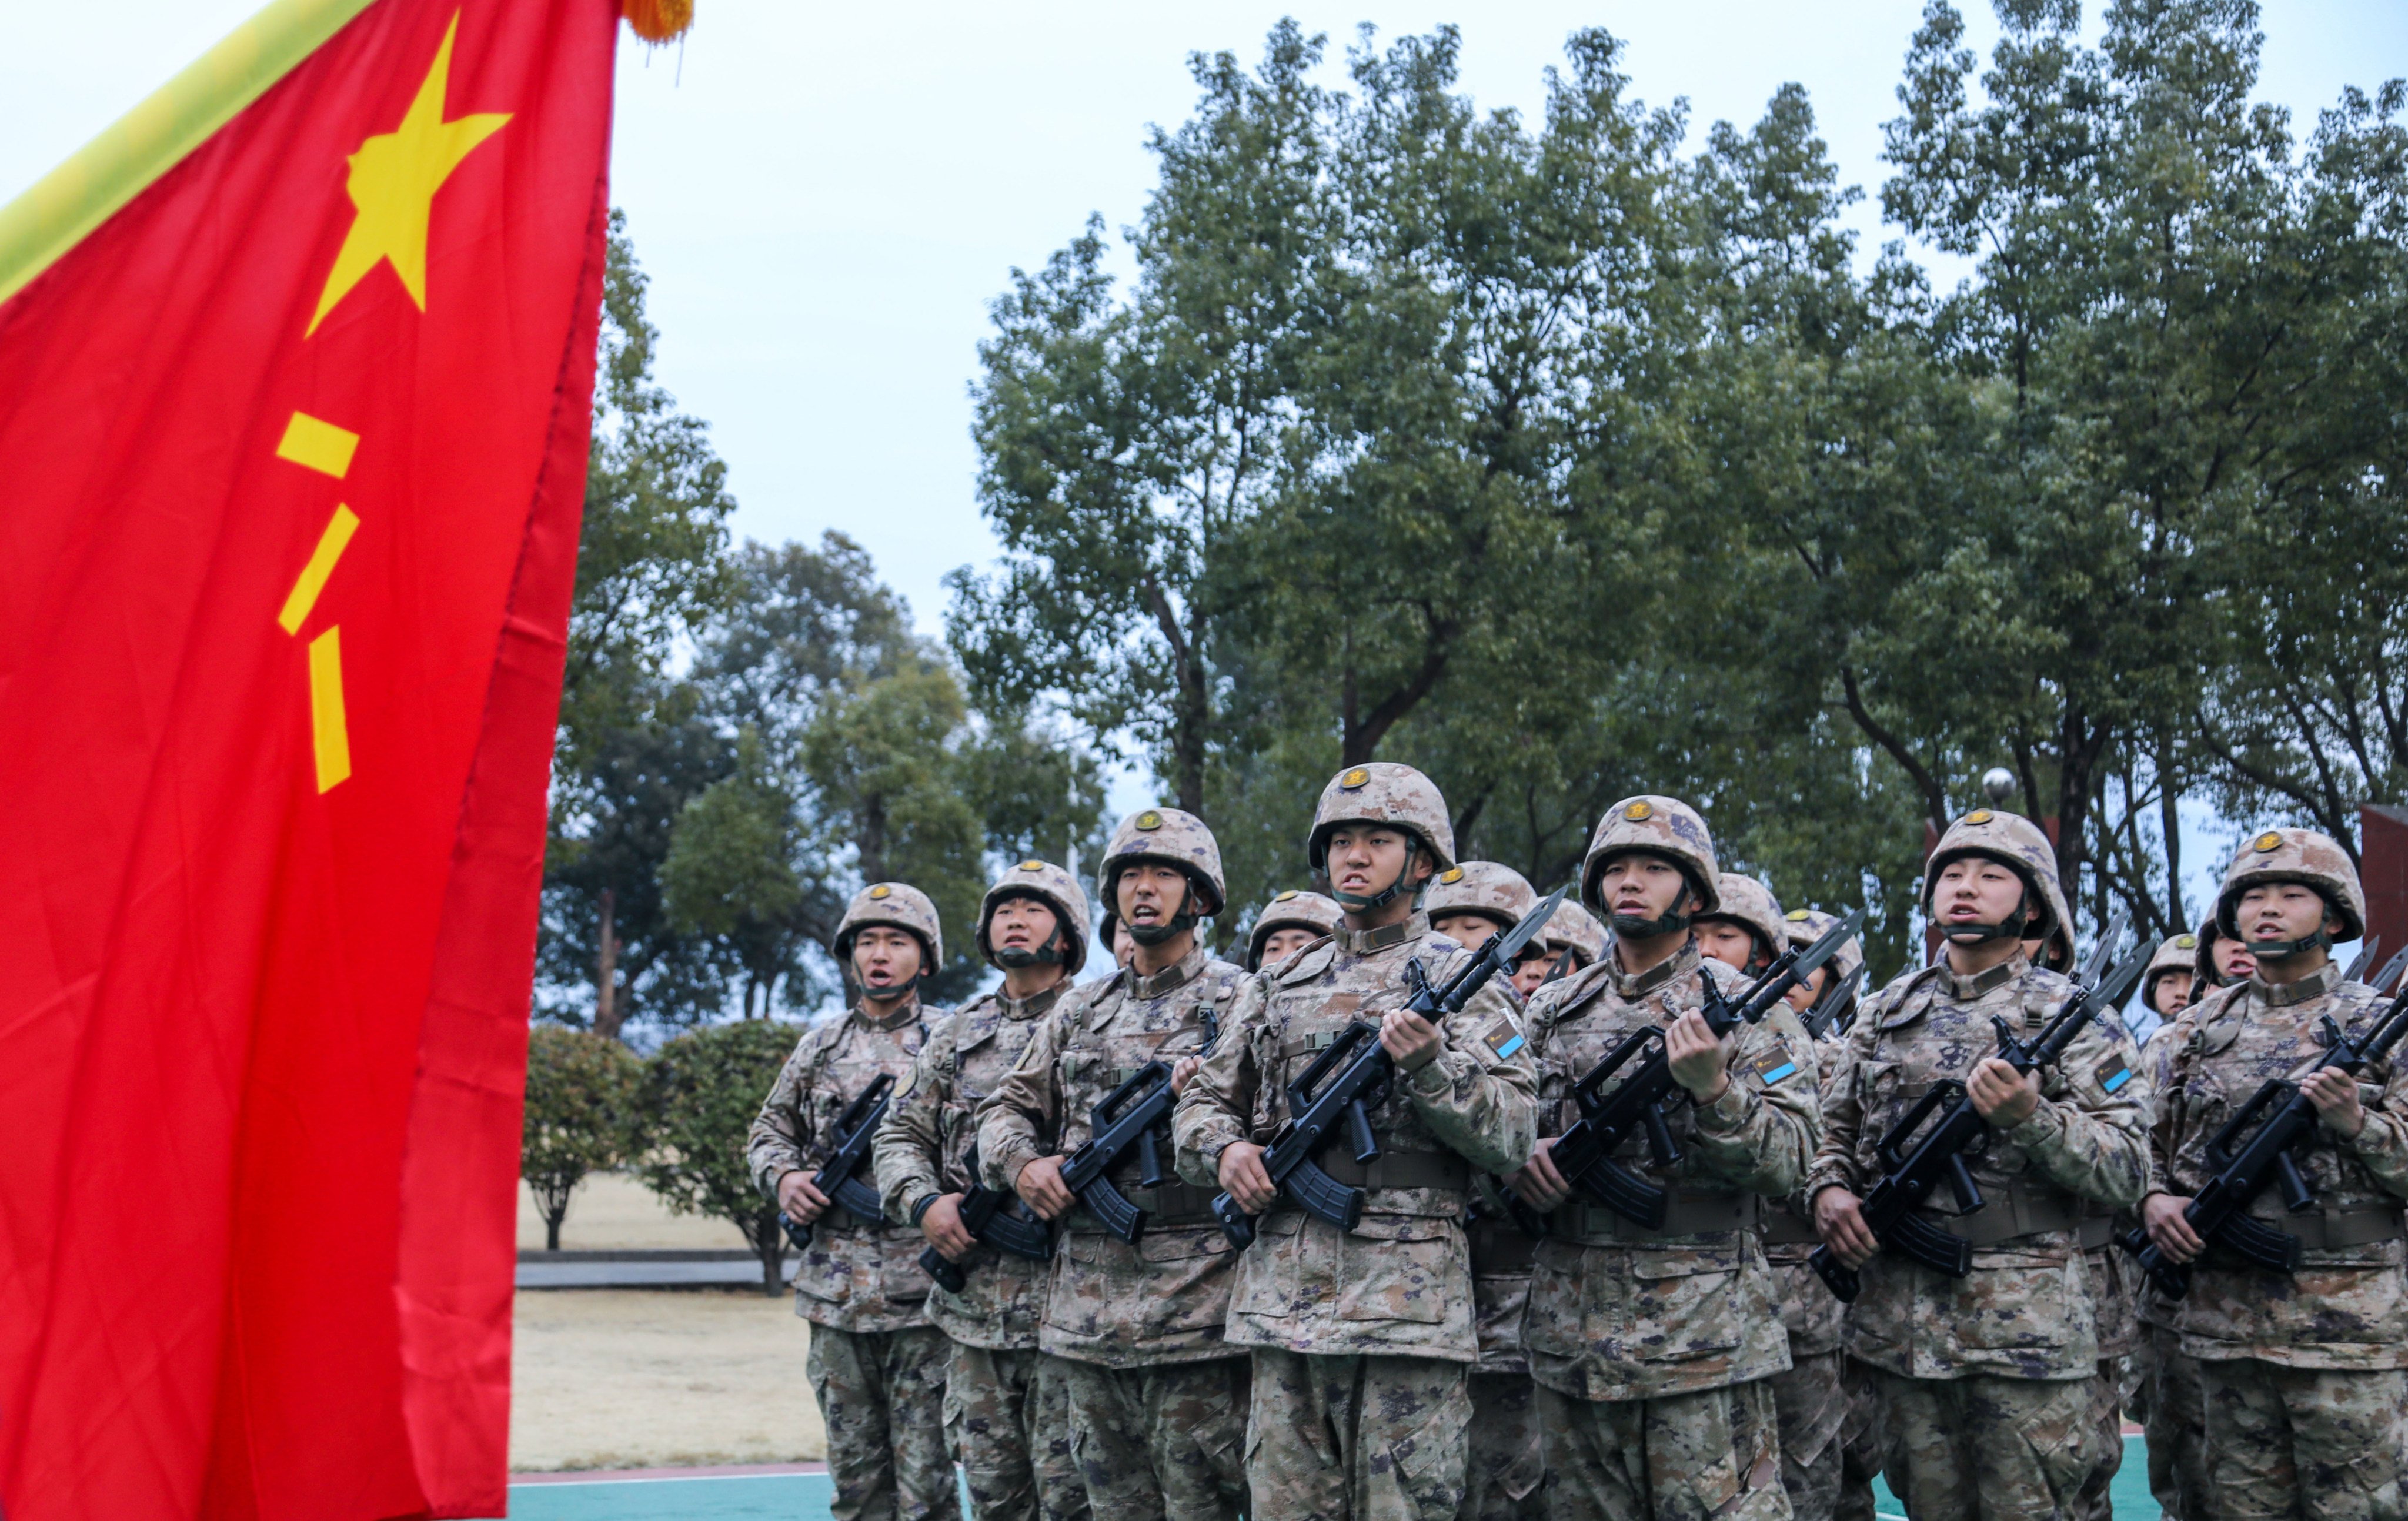 In the past month, three provincial-level party secretaries have made special tours to the Eastern Theatre Command that exercises authority over the military forces within their provinces, according to local newspapers. Photo: PLA Eastern Theatre Weibo